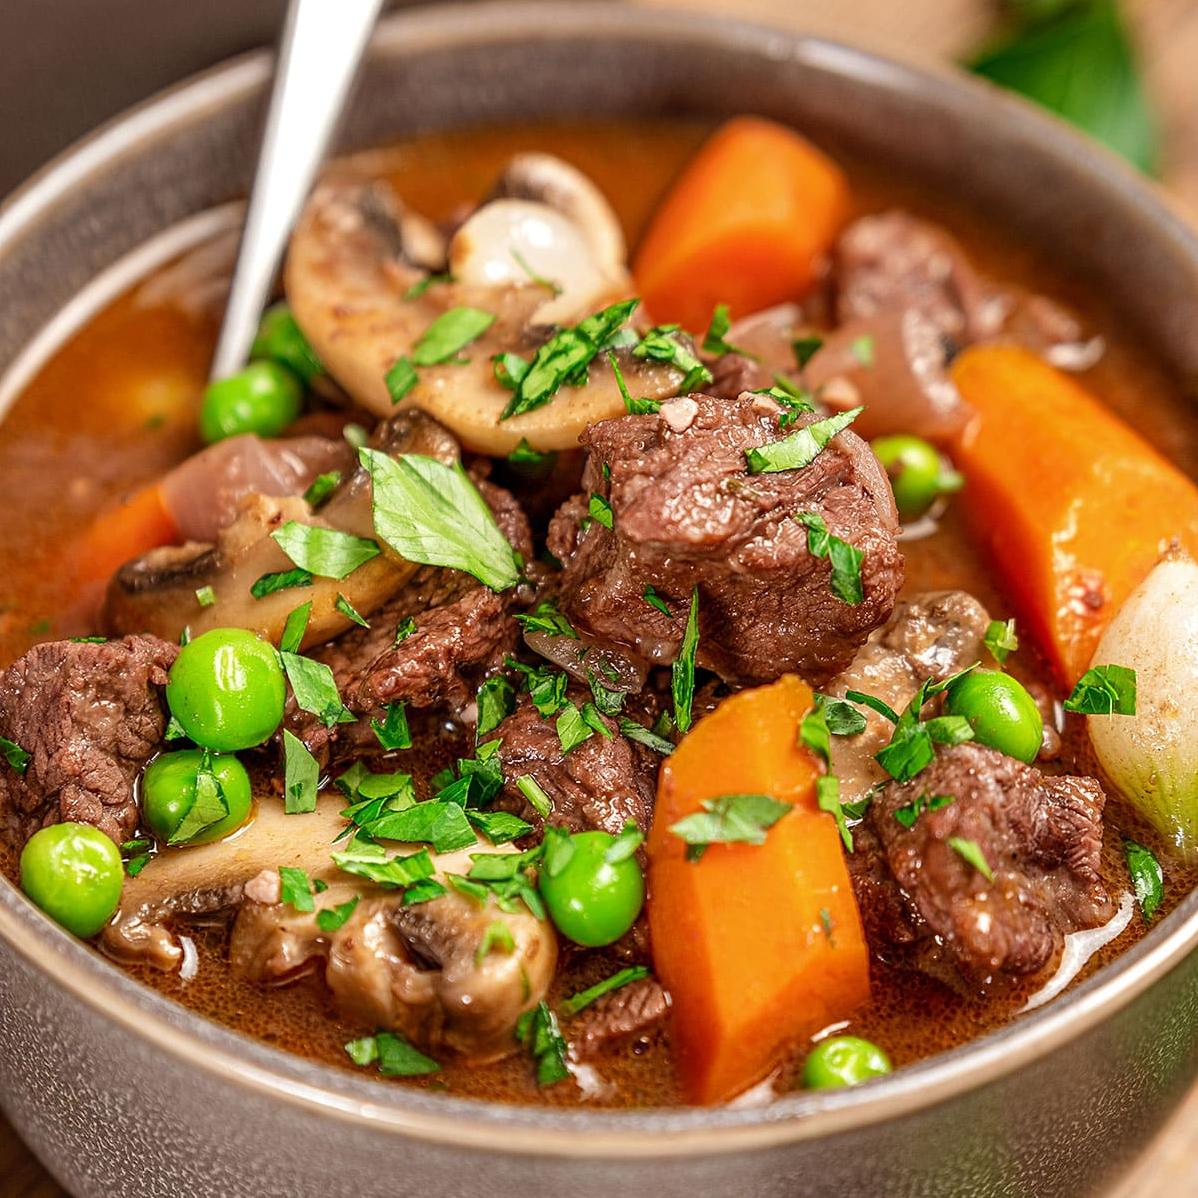  A hearty stew to warm up any cold night